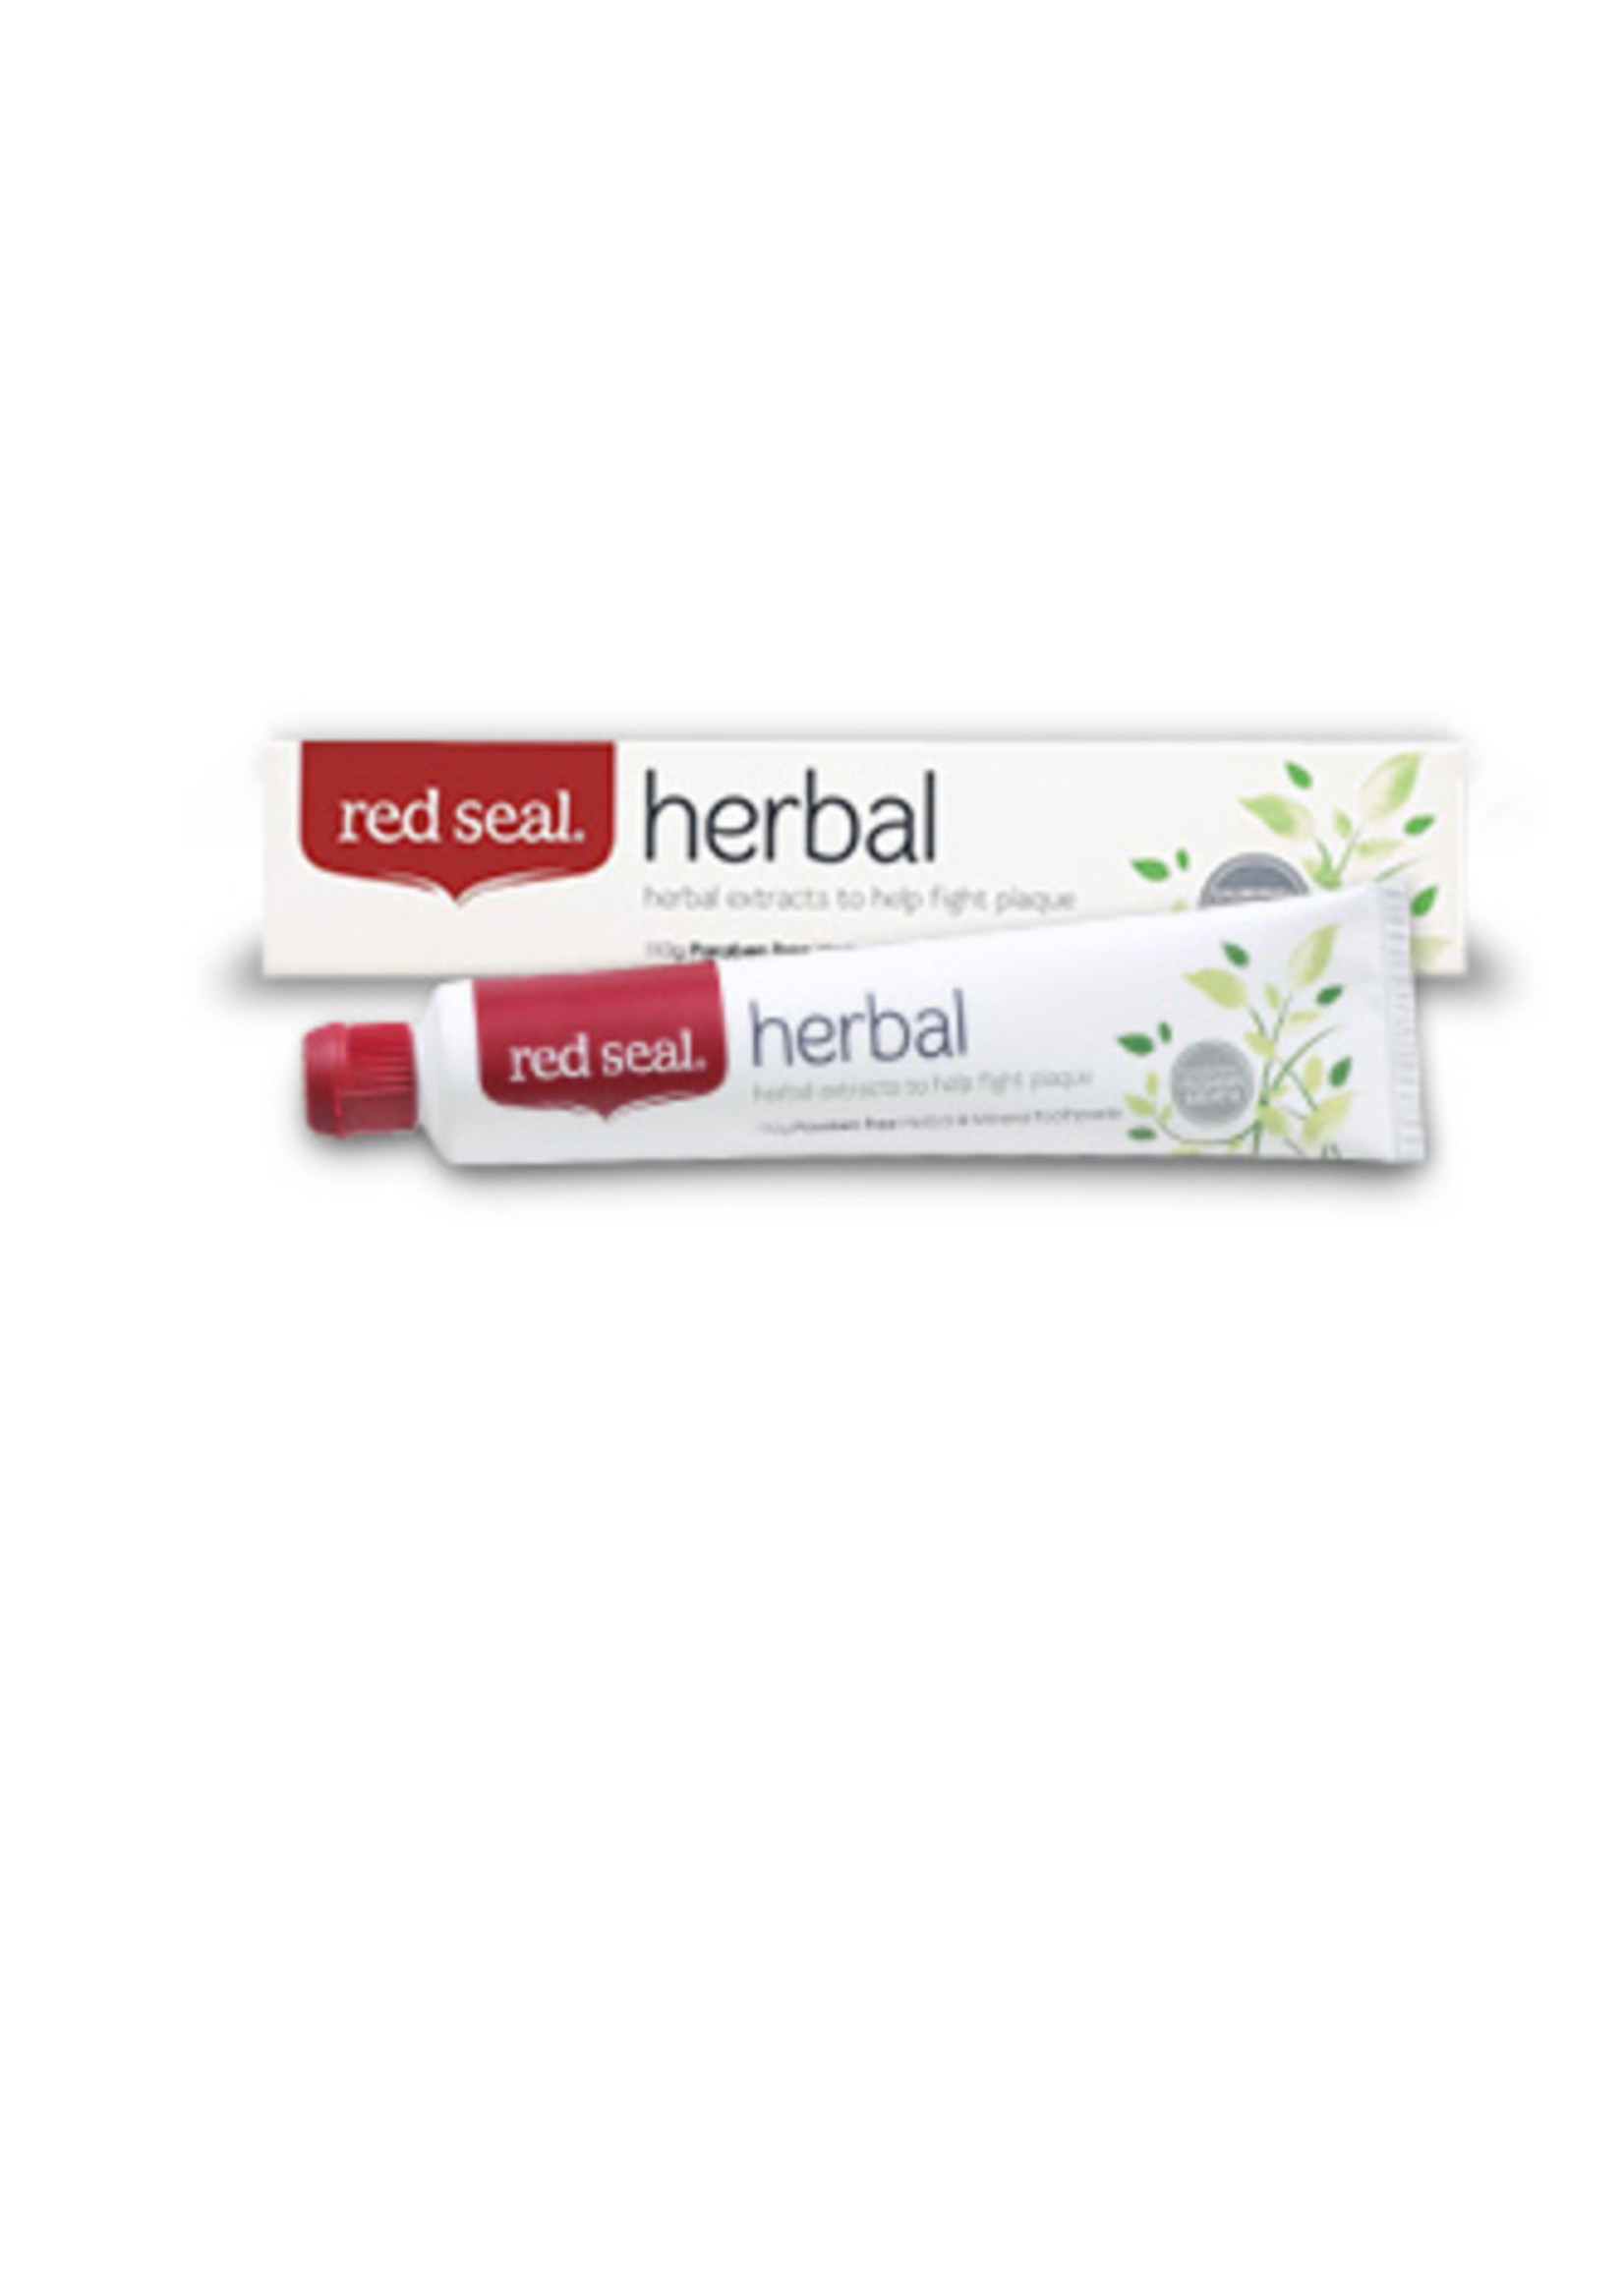 Red Seal Natural Health Products Red Seal Herbal Fresh Toothpaste 110g